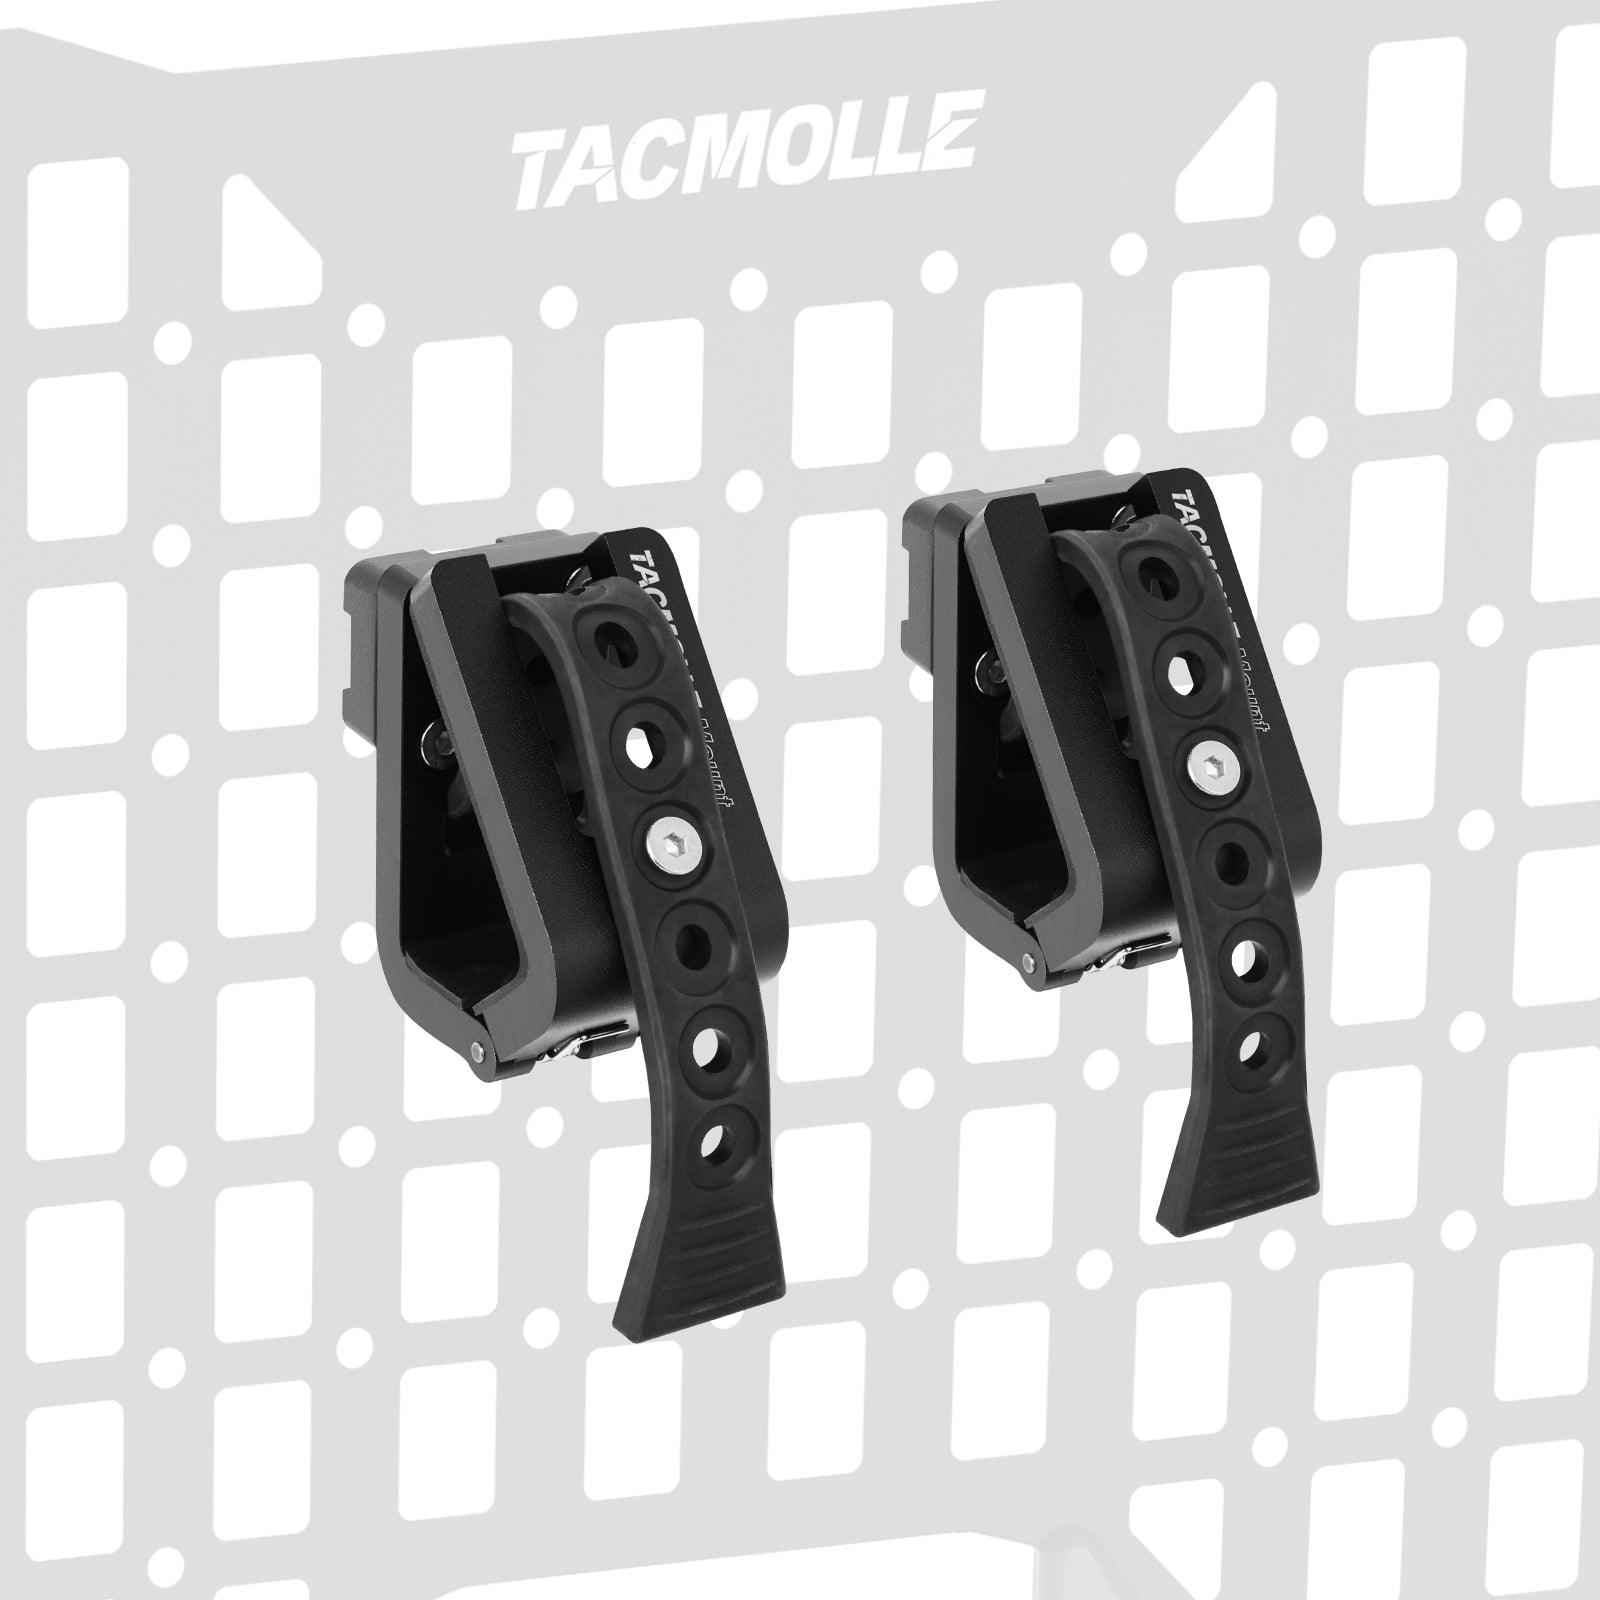 TACMOLLE Gun Rack for Tactical Rigid MOLLE Panel, 2-Pack - TACMOLLE